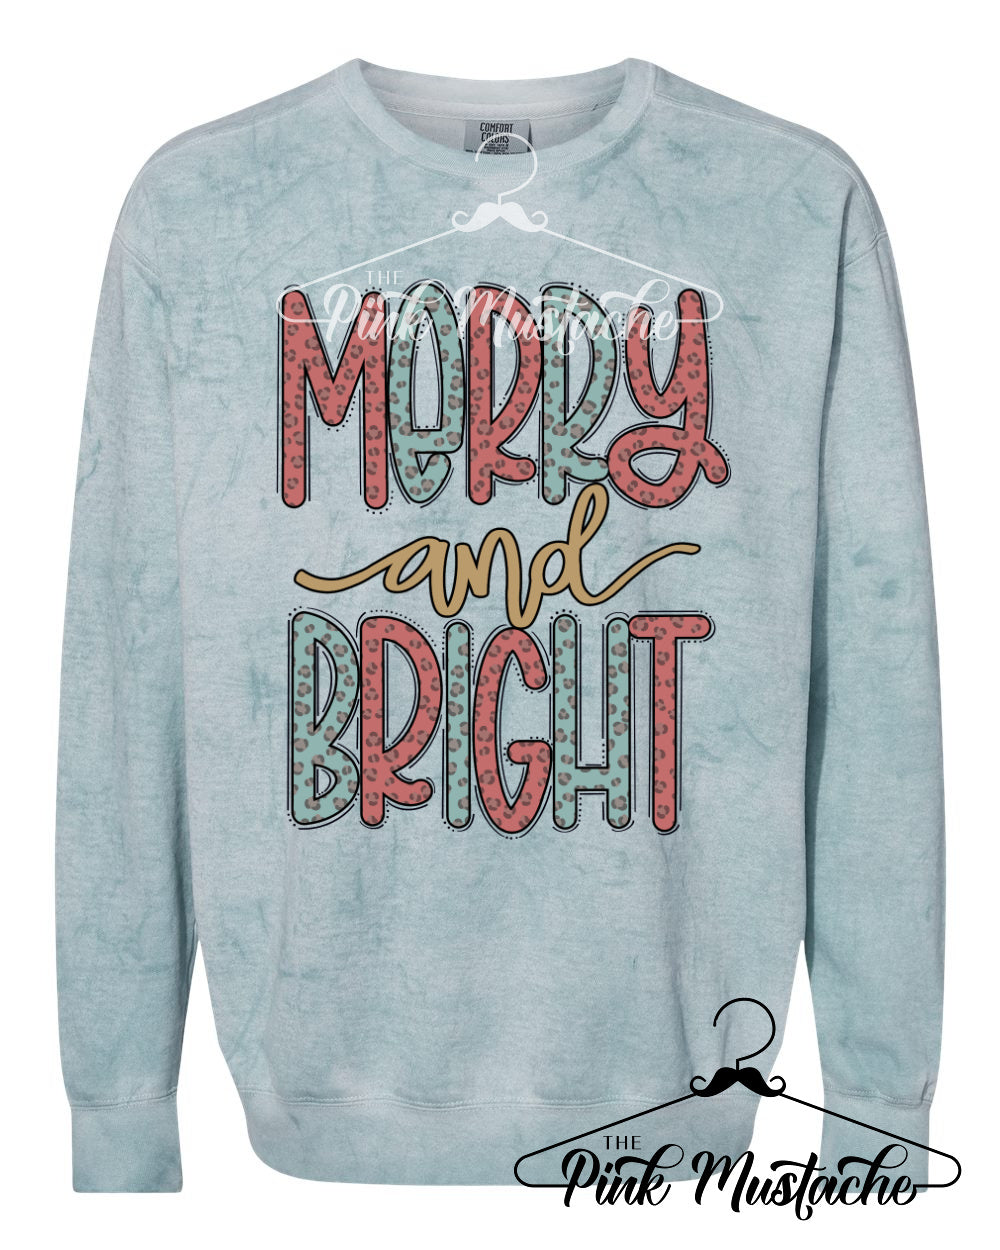 Comfort Colors Colorblast Merry and Bright Sweatshirt - Sizes and Inventory Limited